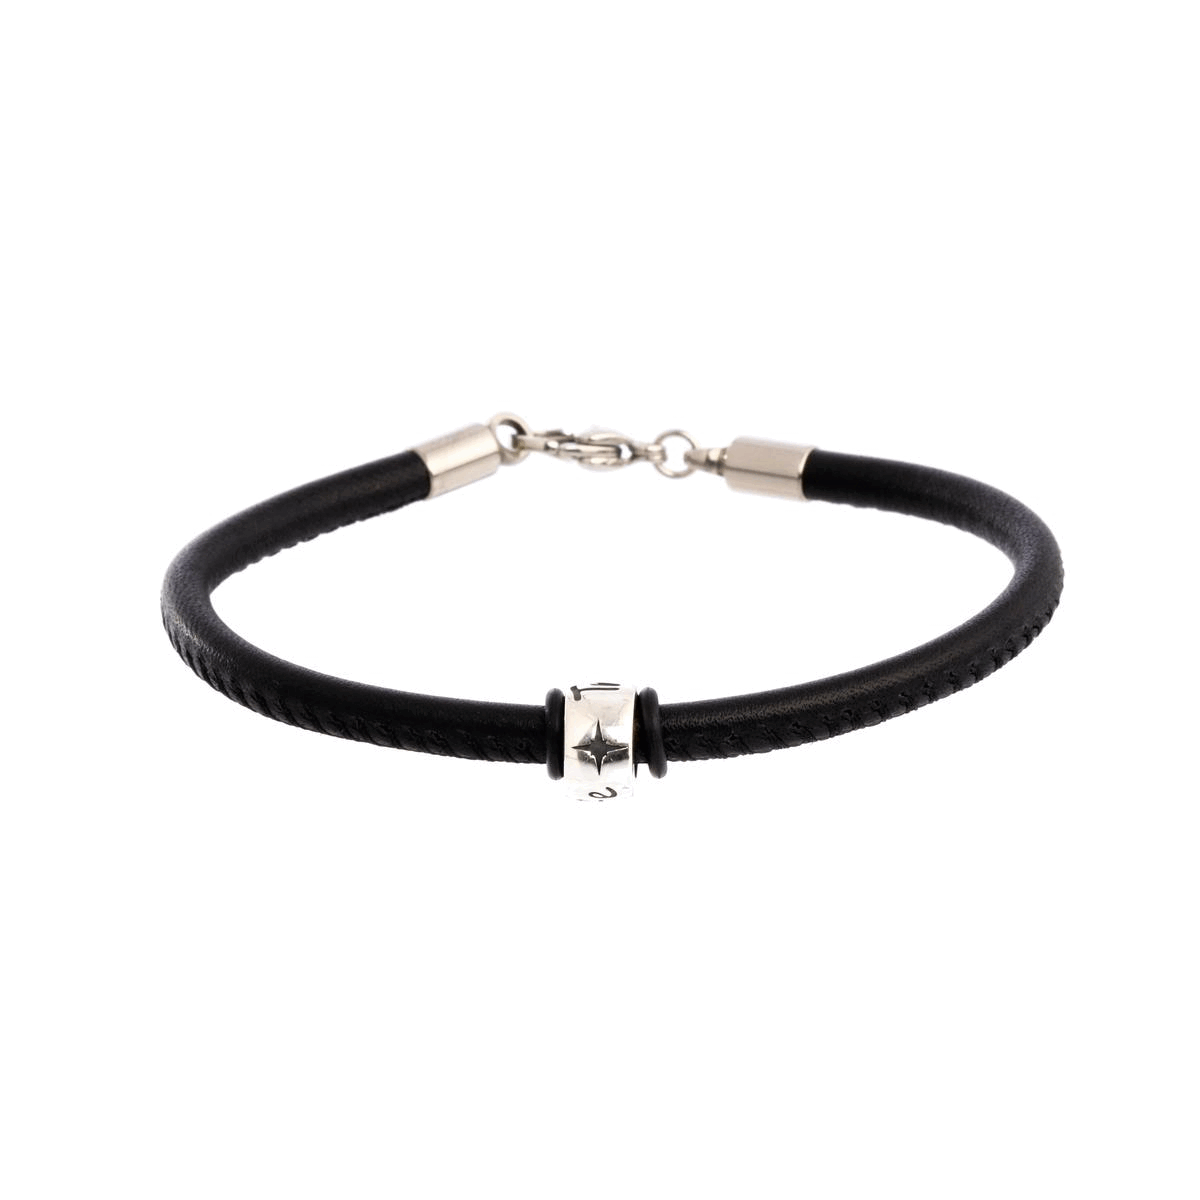 Travel Safe Silver & Italian Stitched Leather Bracelet - alternative travel gift from Off The map Brighton